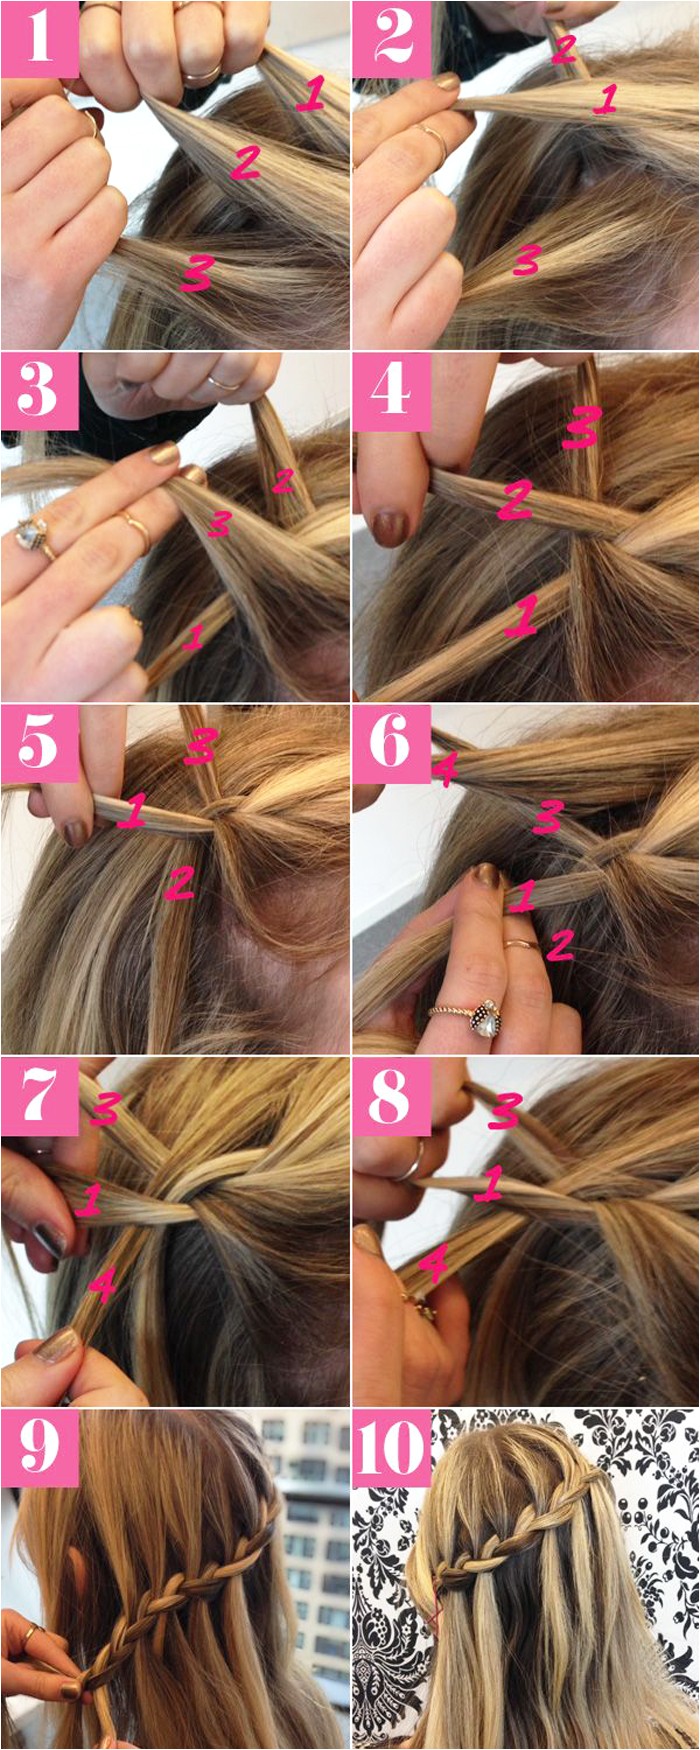 easy step by step hairstyle tutorials for medium length hair